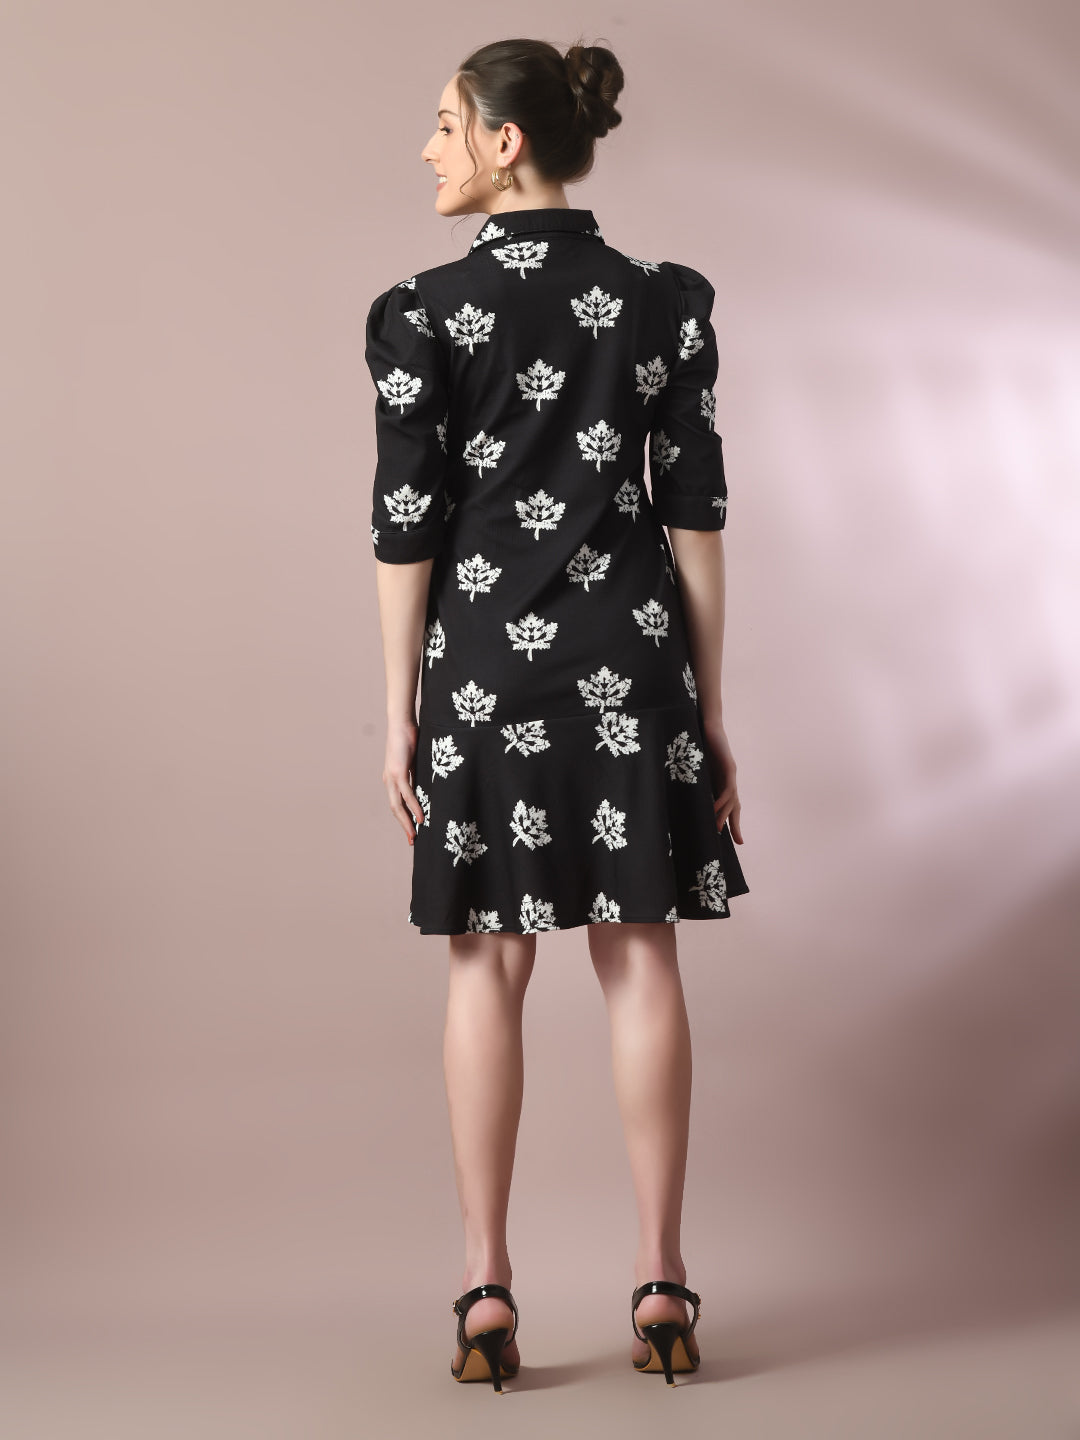 Women's  Black Printed Shirt Collar Fit And Flare Party Dress  - Myshka